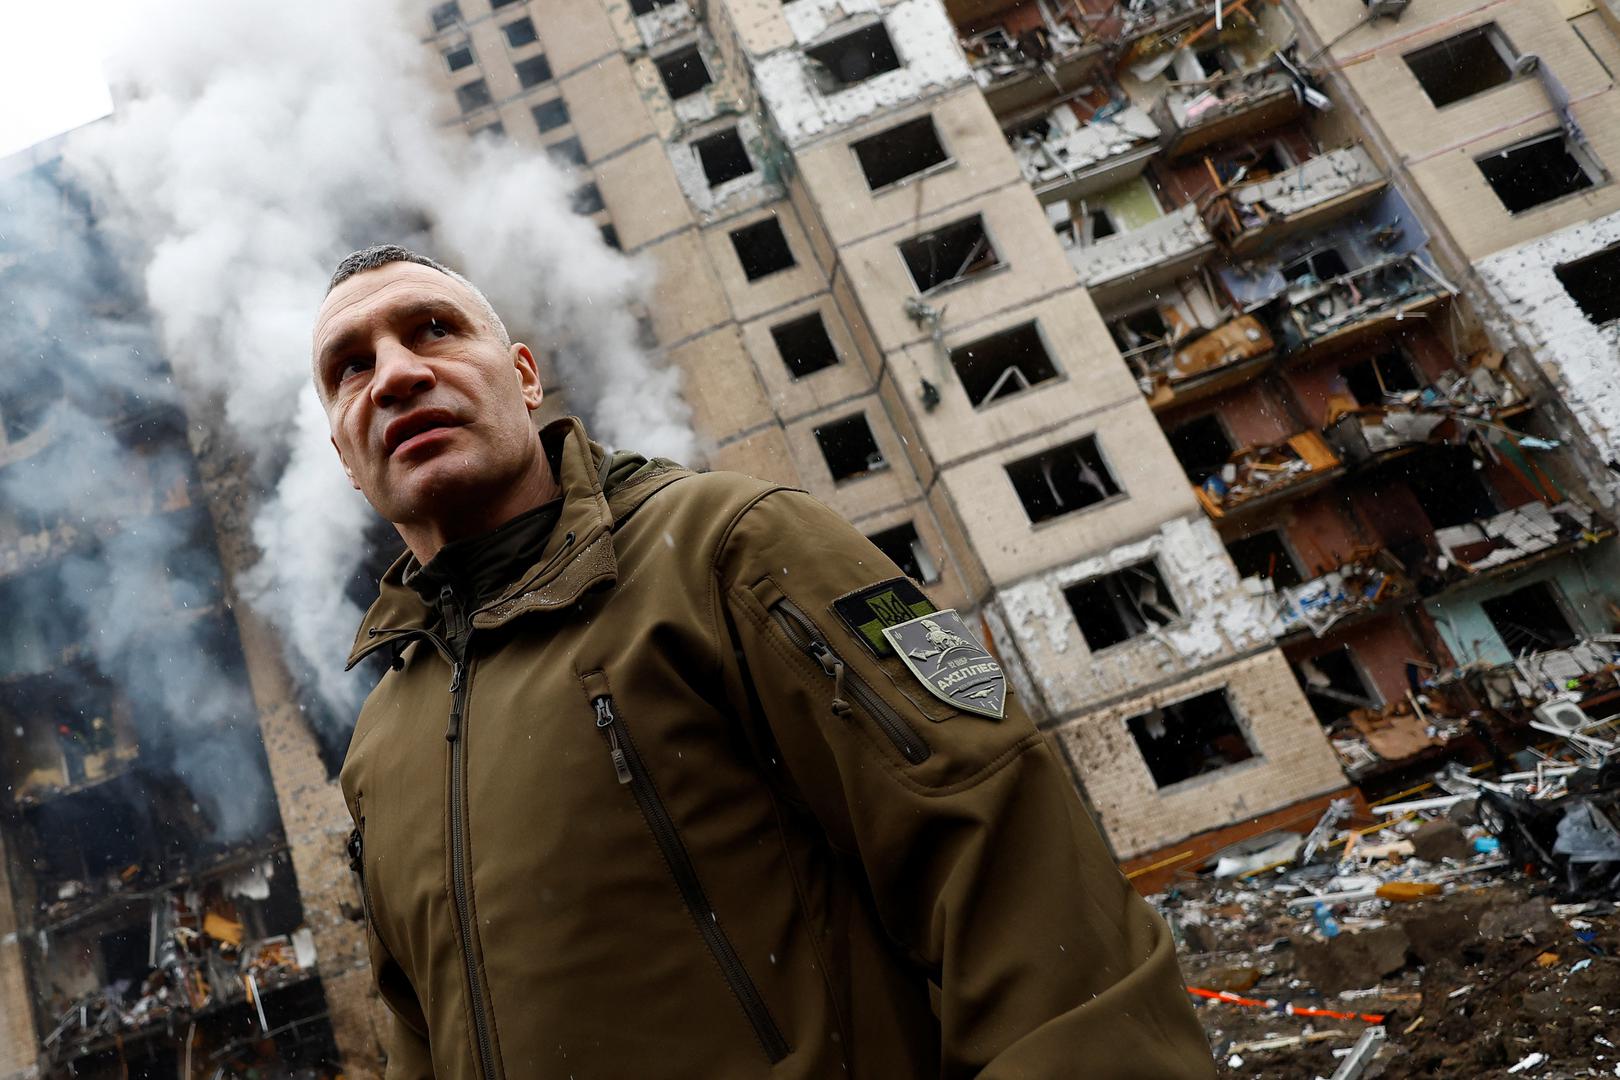 Kyiv Mayor Vitali Klitschko visits the site of a residential building heavily damaged during a Russian missile attack, amid Russia's attack on Ukraine, in Kyiv, Ukraine January 2, 2024. REUTERS/Valentyn Ogirenko Photo: VALENTYN OGIRENKO/REUTERS